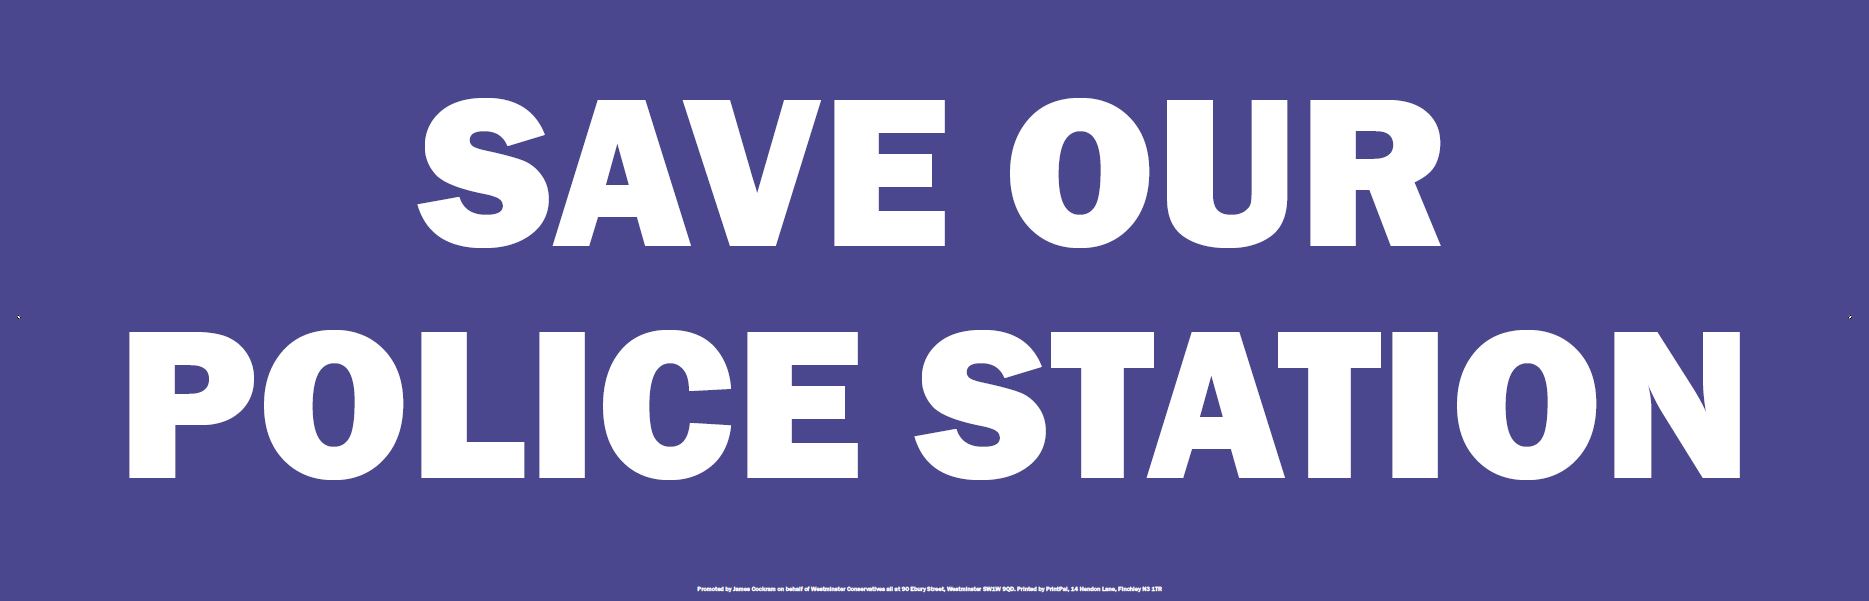 save our police station